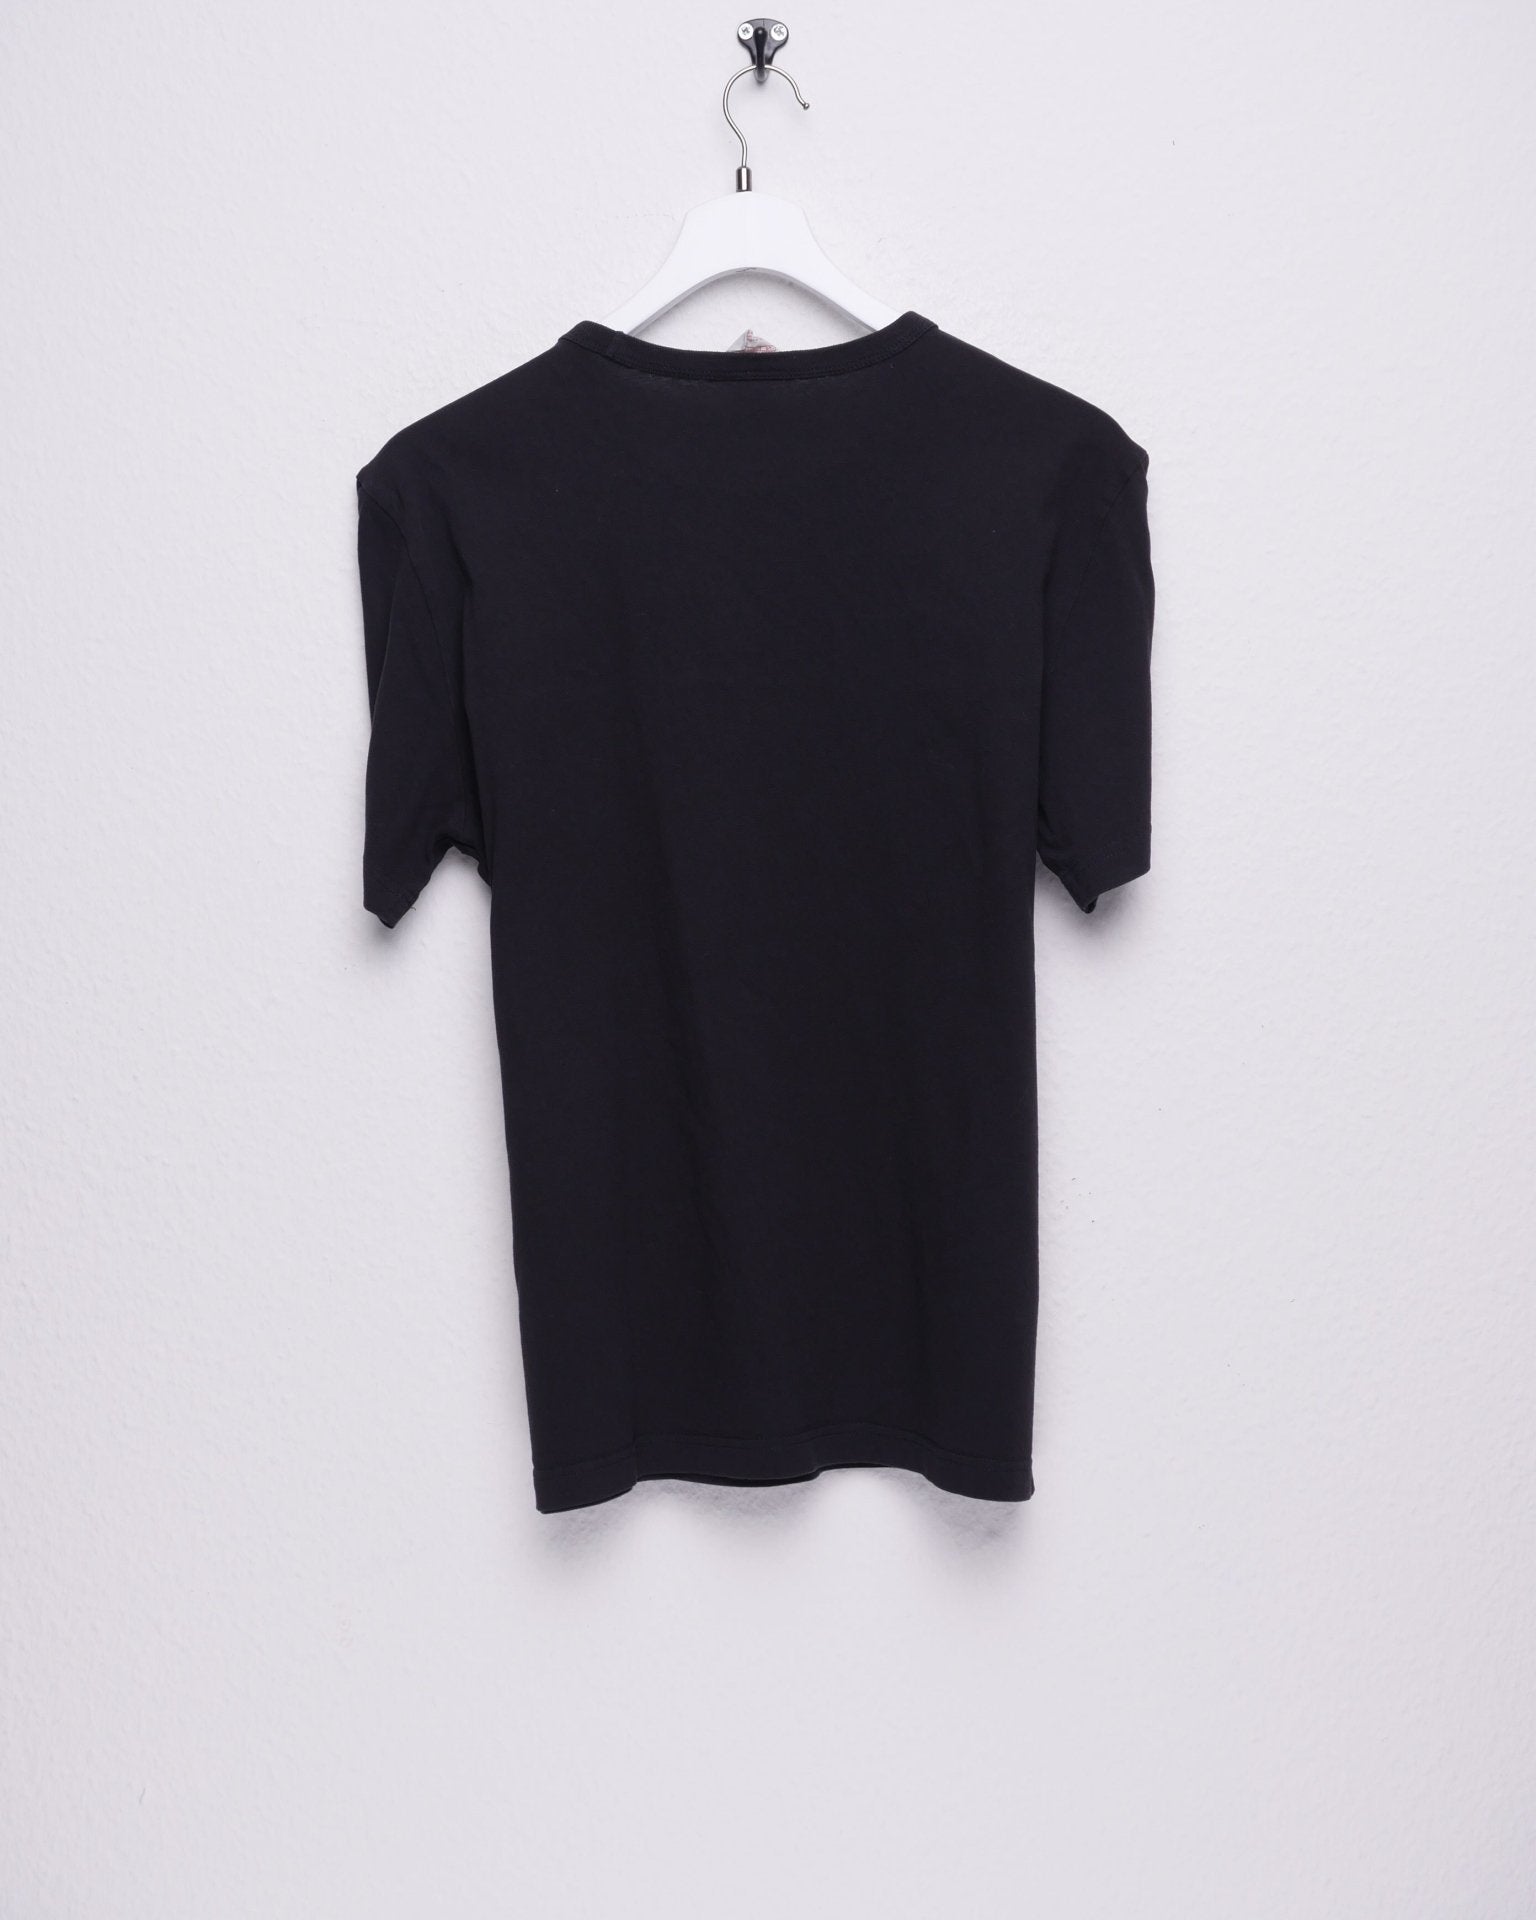 Champion embroidered Spellout black Shirt - Peeces